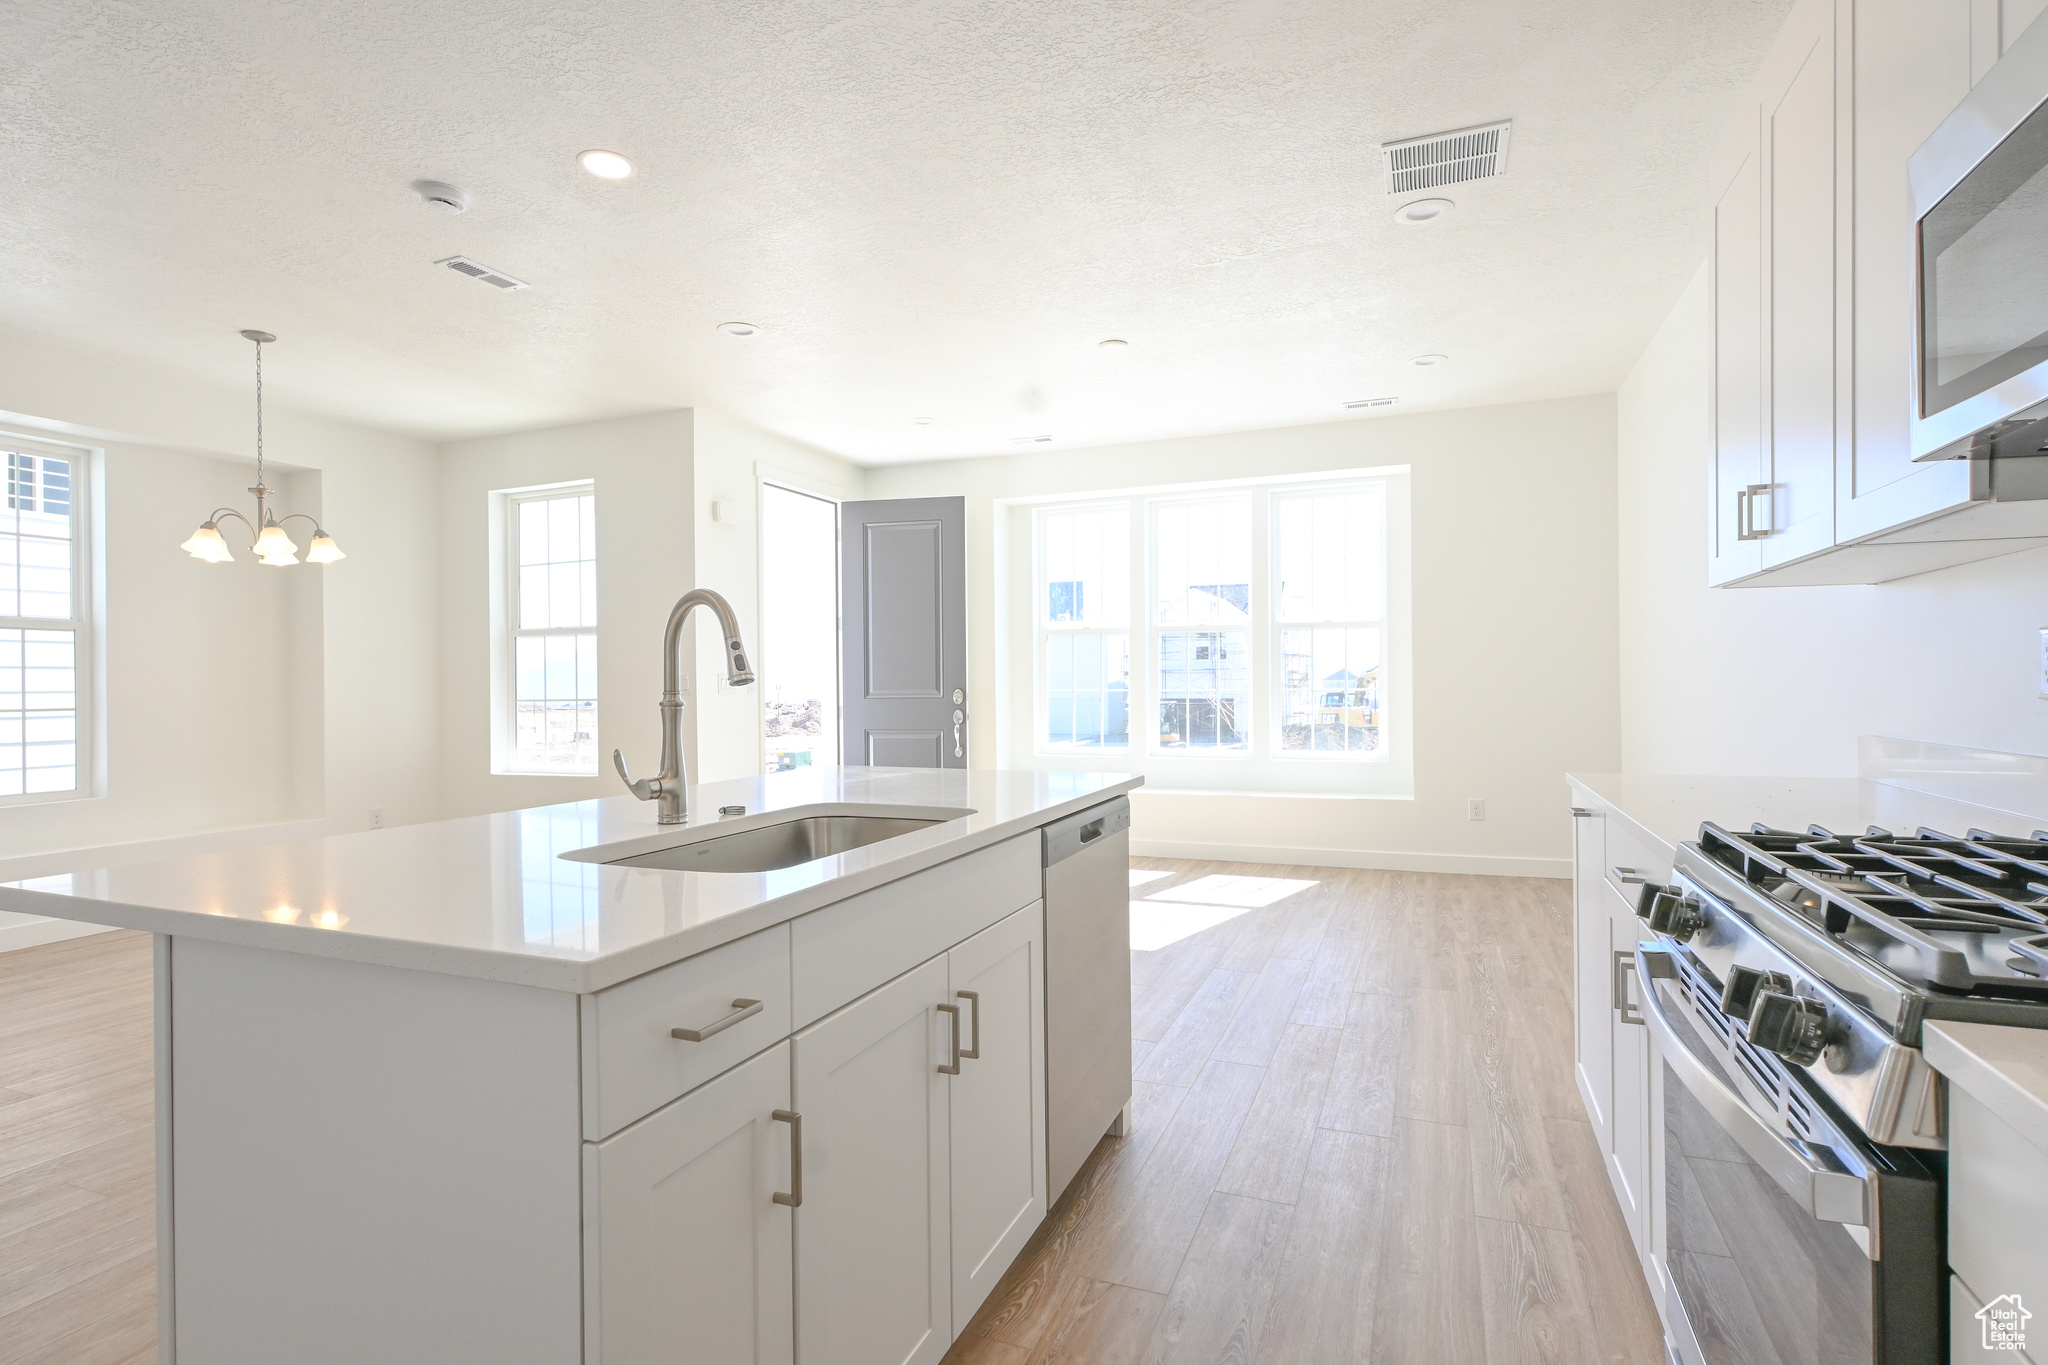 Kitchen featuring sink, appliances with stainless steel finishes, light hardwood / wood-style flooring, a center island with sink, and an inviting chandelier